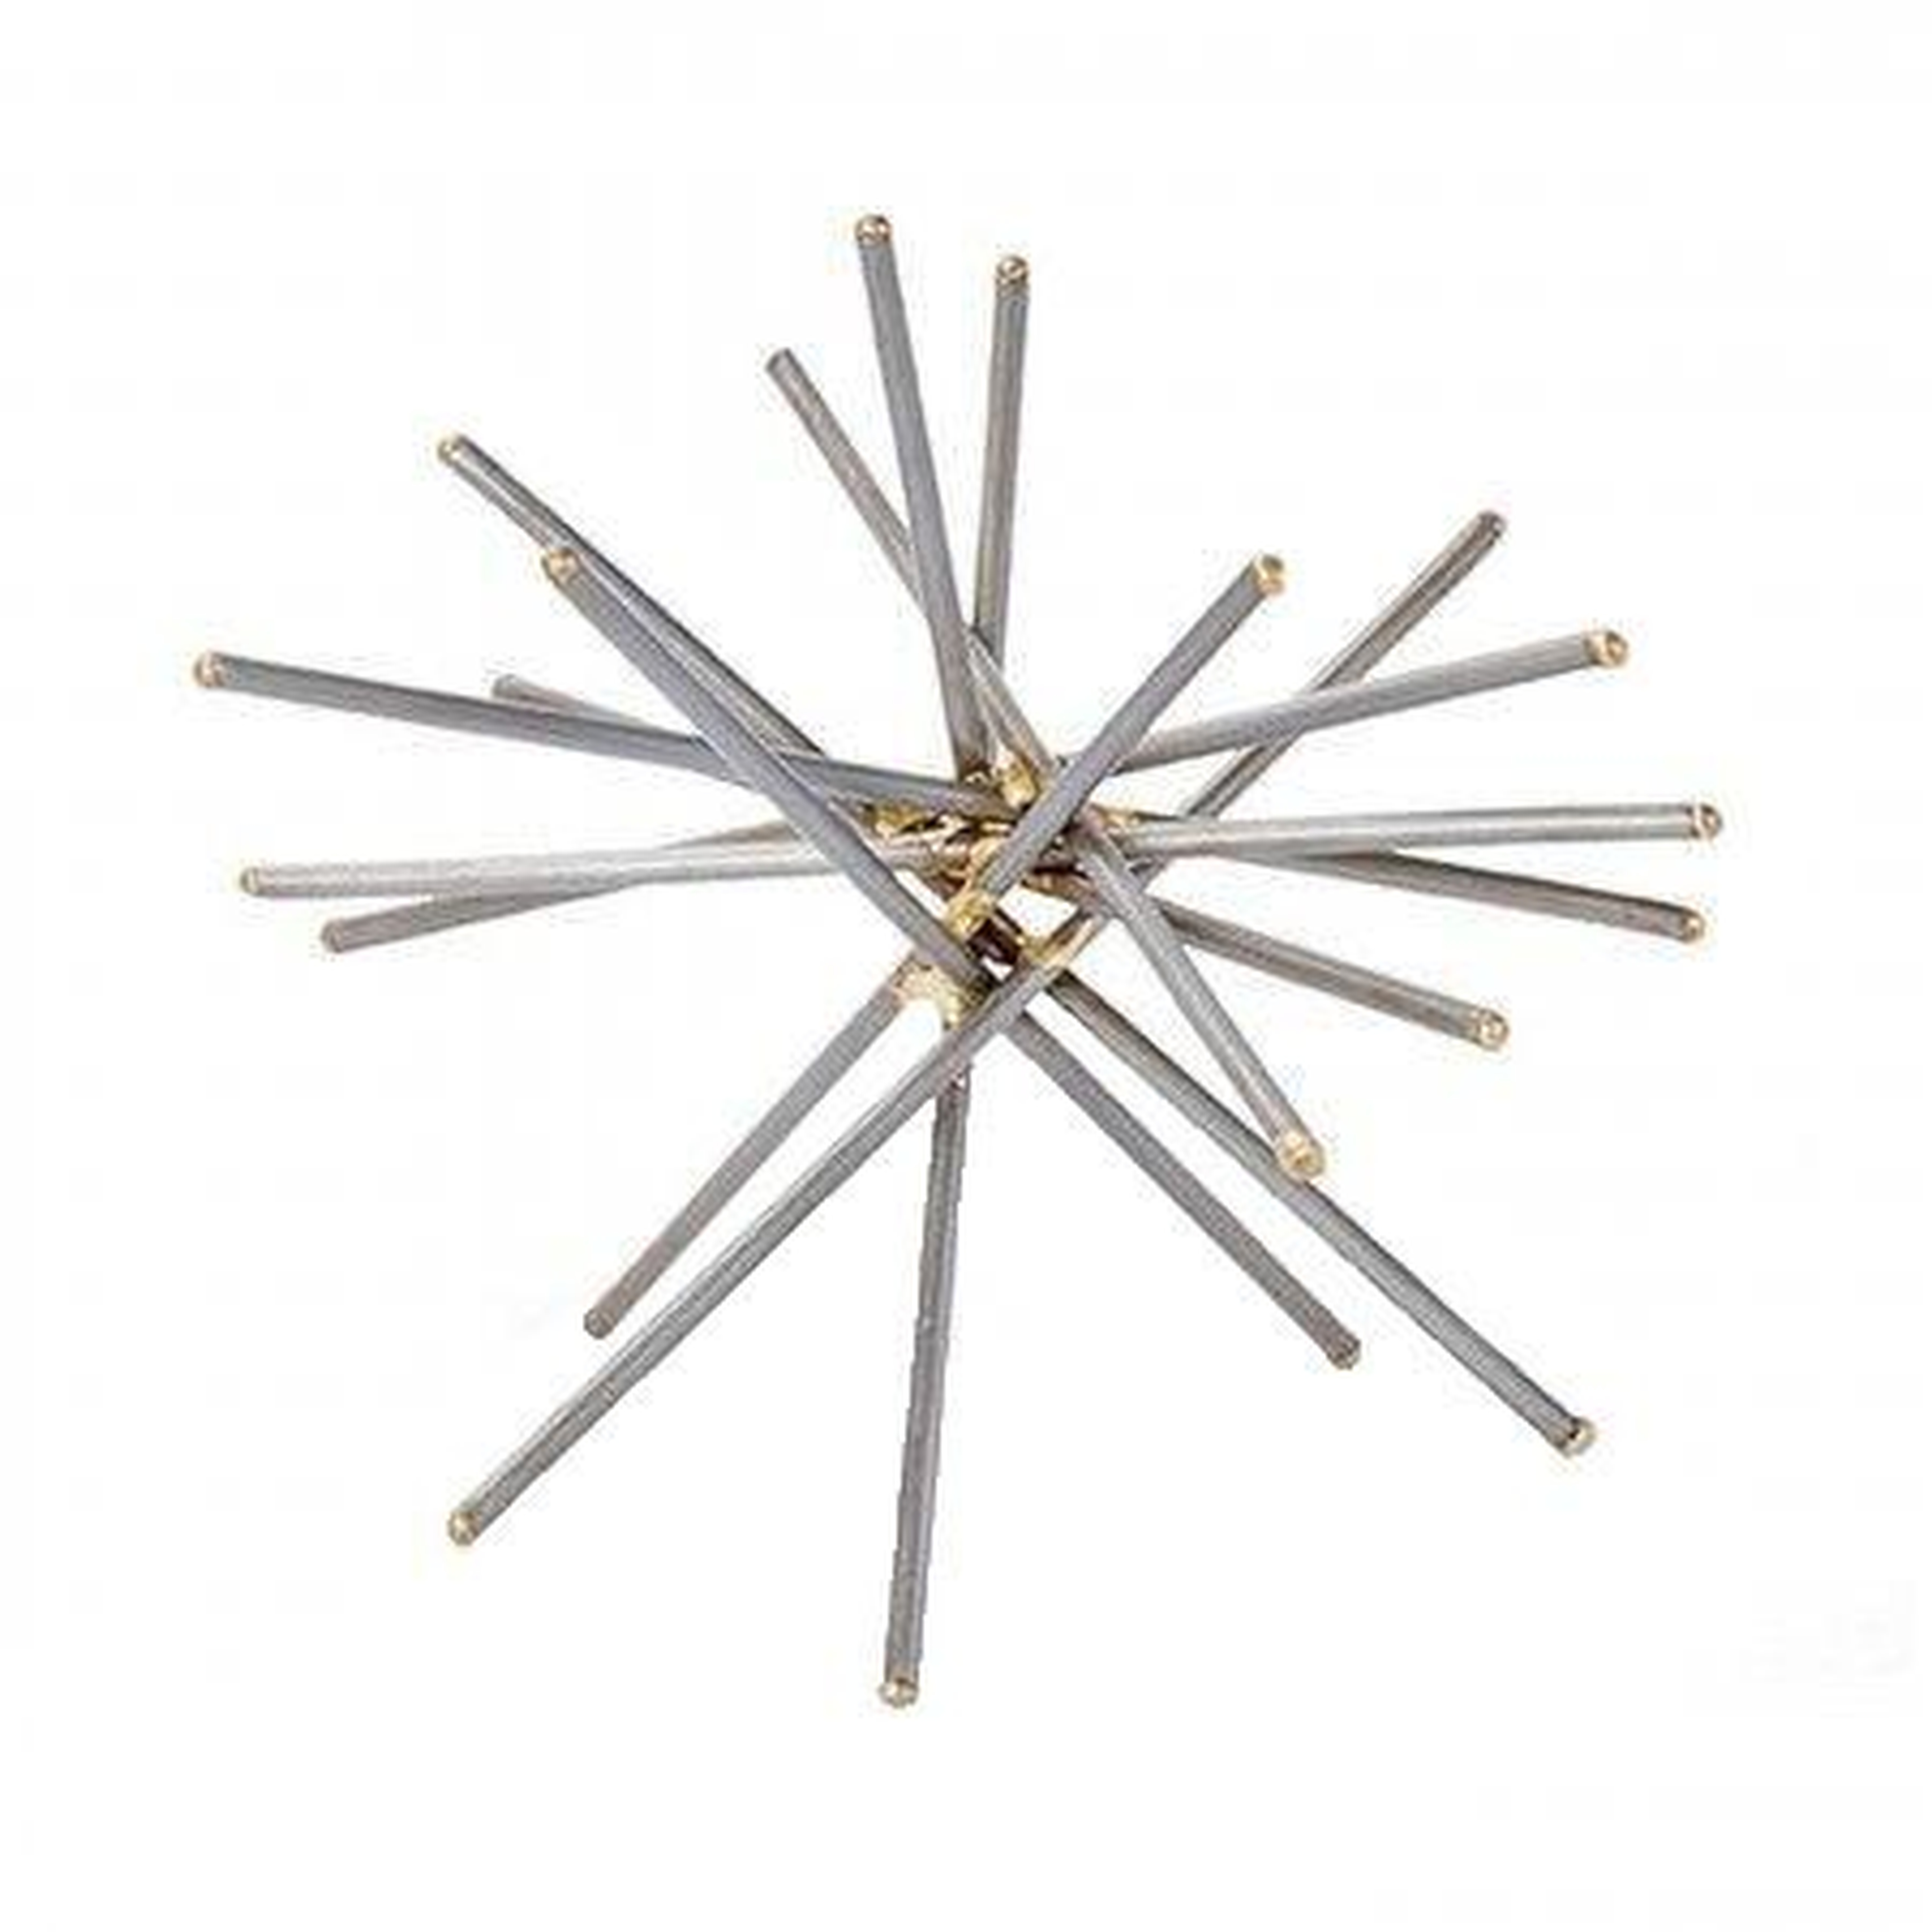 GOLD TIPPED SPIKE SCULPTURE - McGee & Co.